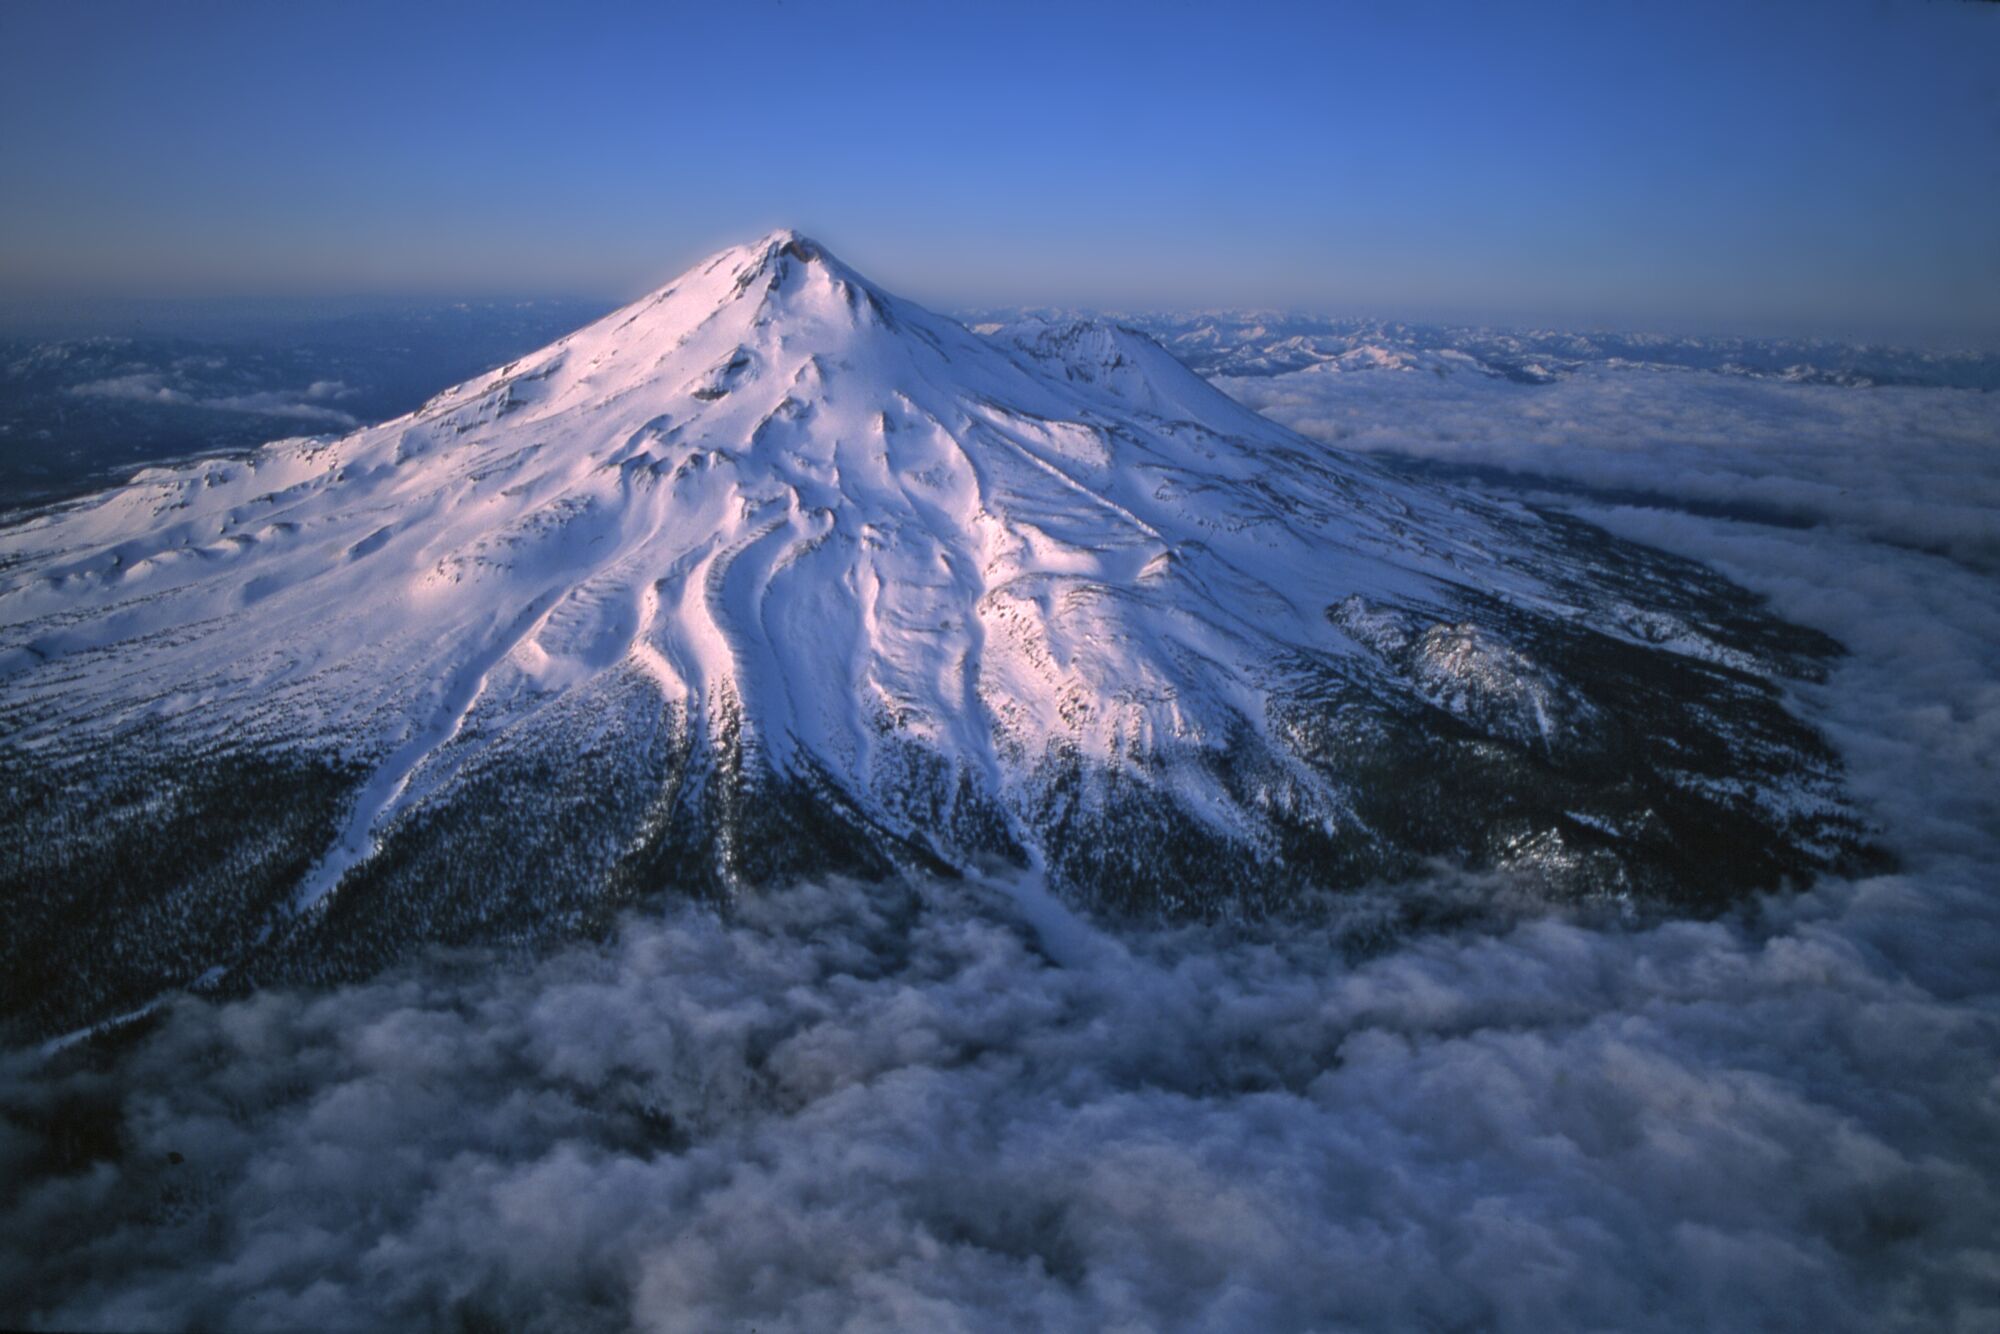 A snow-covered, conical mountain peak